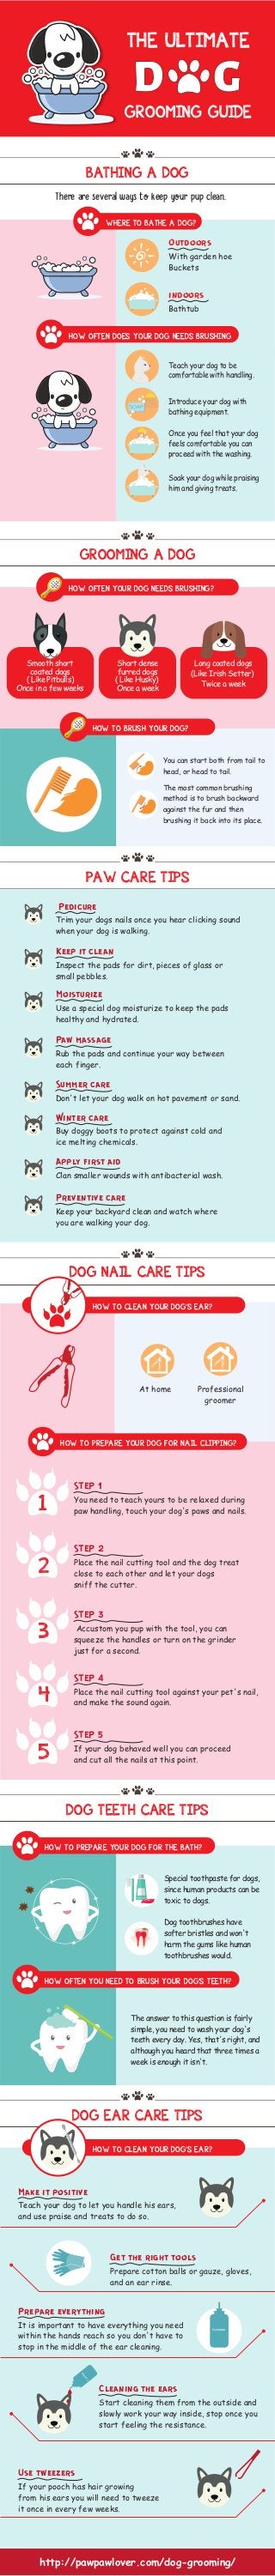 GROOMING GUIDE
THE ULTIMATE
BATHING A DOG
There are several ways to keep your pup clean.
WHERE TO BATHE A DOG?
HOW OFTEN DOES YOUR DOG NEEDS BRUSHING
Outdoors
With garden hoe
Buckets
indoors
Bathtub
Teach your dog to be
comfortable with handling.
Introduce your dog with
bathing equipment.
Once you feel that your dog
feels comfortable you can
proceed with the washing.
Soak your dog while praising
him and giving treats.
GROOMING A DOG
PAW CARE TIPS
DOG NAIL CARE TIPS
DOG TEETH CARE TIPS
DOG EAR CARE TIPS
HOW TO PREPARE YOUR DOG FOR NAIL CLIPPING?
HOW TO PREPARE YOUR DOG FOR THE BATH?
HOW OFTEN YOUR DOG NEEDS BRUSHING?
HOW TO BRUSH YOUR DOG?
Pedicure
Trim your dogs nails once you hear clicking sound
when your dog is walking.
At home Professional
groomer
Special toothpaste for dogs,
since human products can be
toxic to dogs.
Dog toothbrushes have
softer bristles and won't
harm the gums like human
toothbrushes would.
You can start both from tail to
head, or head to tail.
The most common brushing
method is to brush backward
against the fur and then
brushing it back into its place.
Smooth short
coated dogs
( Like Pitbulls)
Once in a few weeks
Short dense
furred dogs
( Like Husky)
Once a week
Long coated dogs
(Like Irish Setter)
Twice a week
Moisturize
Use a special dog moisturize to keep the pads
healthy and hydrated.
Paw massage
Rub the pads and continue your way between
each finger.
Winter care
Buy doggy boots to protect against cold and
ice melting chemicals.
Apply first aid
Clan smaller wounds with antibacterial wash.
Preventive care
Keep your backyard clean and watch where
you are walking your dog.
STEP 1
You need to teach yours to be relaxed during
paw handling, touch your dog's paws and nails.
Summer care
Don't let your dog walk on hot pavement or sand.
Keep it clean
Inspect the pads for dirt, pieces of glass or
small pebbles.
1
STEP 2
Place the nail cutting tool and the dog treat
close to each other and let your dogs
sniff the cutter.
2
STEP 3
Accustom you pup with the tool, you can
squeeze the handles or turn on the grinder
just for a second.
3
STEP 4
Place the nail cutting tool against your pet's nail,
and make the sound again.4
STEP 5
If your dog behaved well you can proceed
and cut all the nails at this point.5
HOW OFTEN YOU NEED TO BRUSH YOUR DOG'S TEETH?
HOW TO CLEAN YOUR DOG'S EAR?
HOW TO CLEAN YOUR DOG'S EAR?
The answer to this question is fairly
simple, you need to wash your dog's
teeth every day. Yes, that's right, and
although you heard that three times a
week is enough it isn't.
Make it positive
Teach your dog to let you handle his ears,
and use praise and treats to do so.
Get the right tools
Prepare cotton balls or gauze, gloves,
and an ear rinse.
Prepare everything
It is important to have everything you need
within the hands reach so you don't have to
stop in the middle of the ear cleaning.
Cleaning the ears
Start cleaning them from the outside and
slowly work your way inside, stop once you
start feeling the resistance.
Use tweezers
If your pooch has hair growing
from his ears you will need to tweeze
it once in every few weeks.
Cleaning
Cleaning
Text
Text
http://pawpawlover.com/dog-grooming/
 